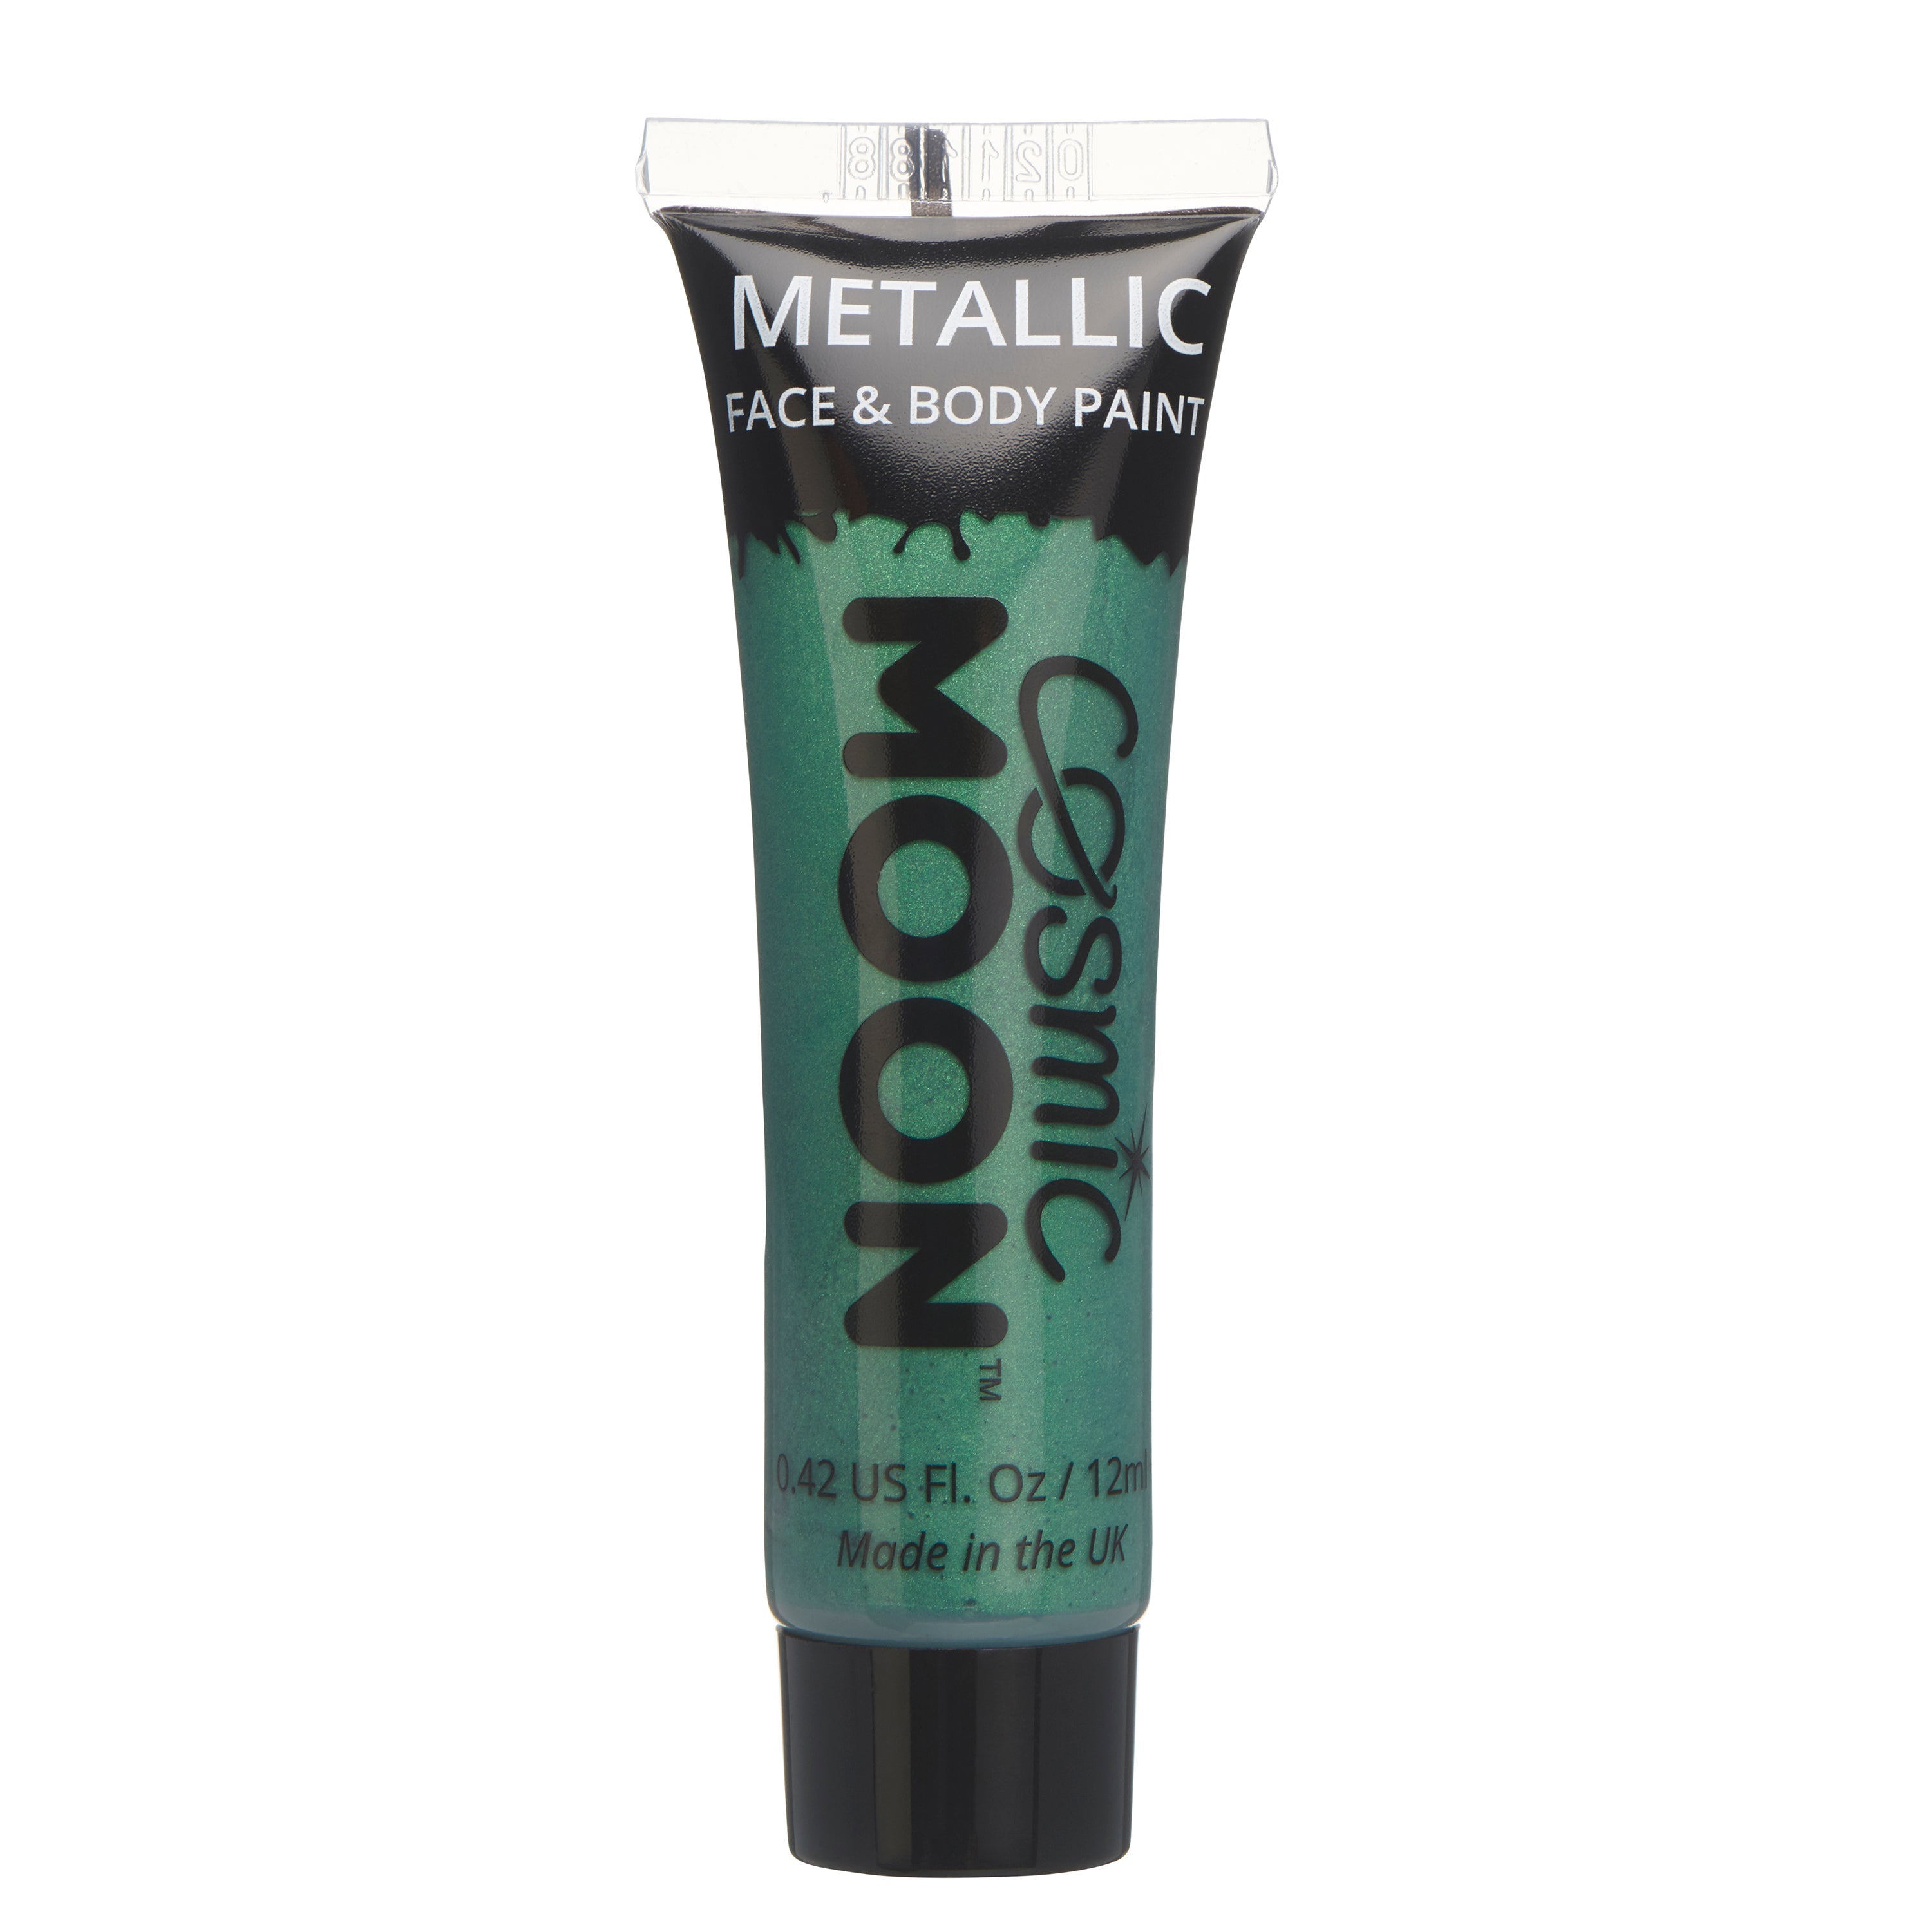 Green - Metallic Face & Body Paint Makeup, 12mL. Cosmetically certified, FDA & Health Canada compliant, cruelty free and vegan.